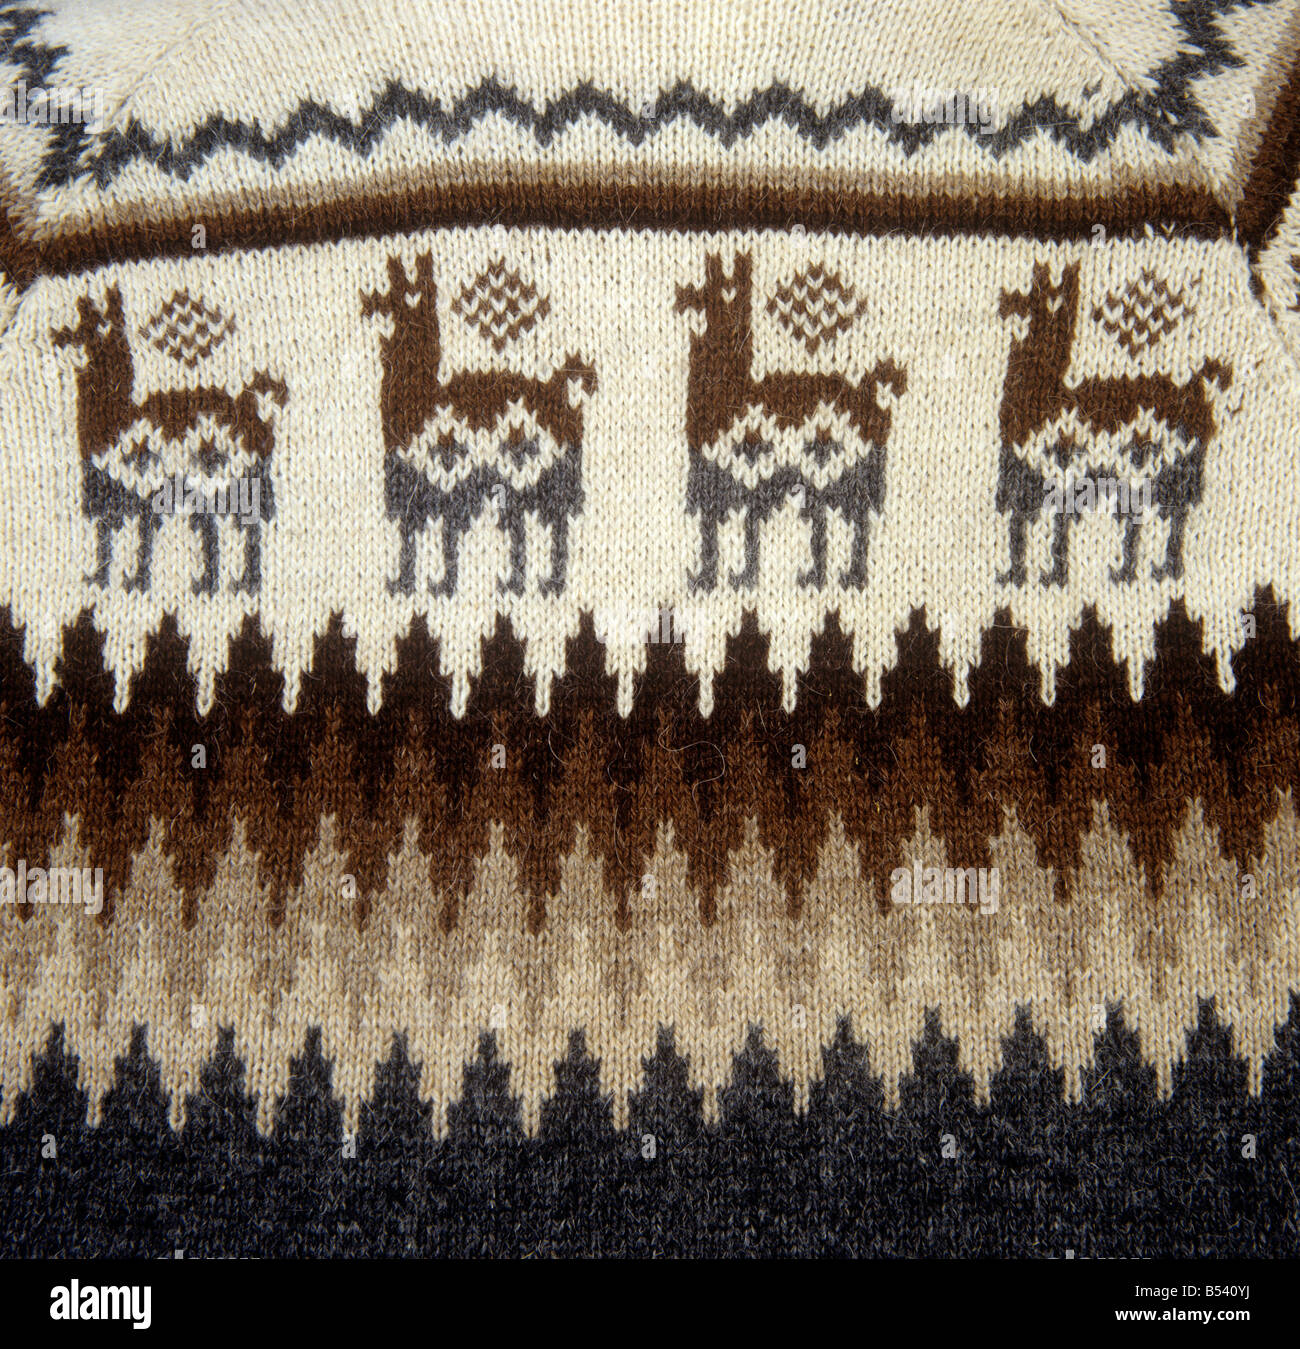 Peruvian Crafts detail of knitted mans sweater from Peru Stock Photo